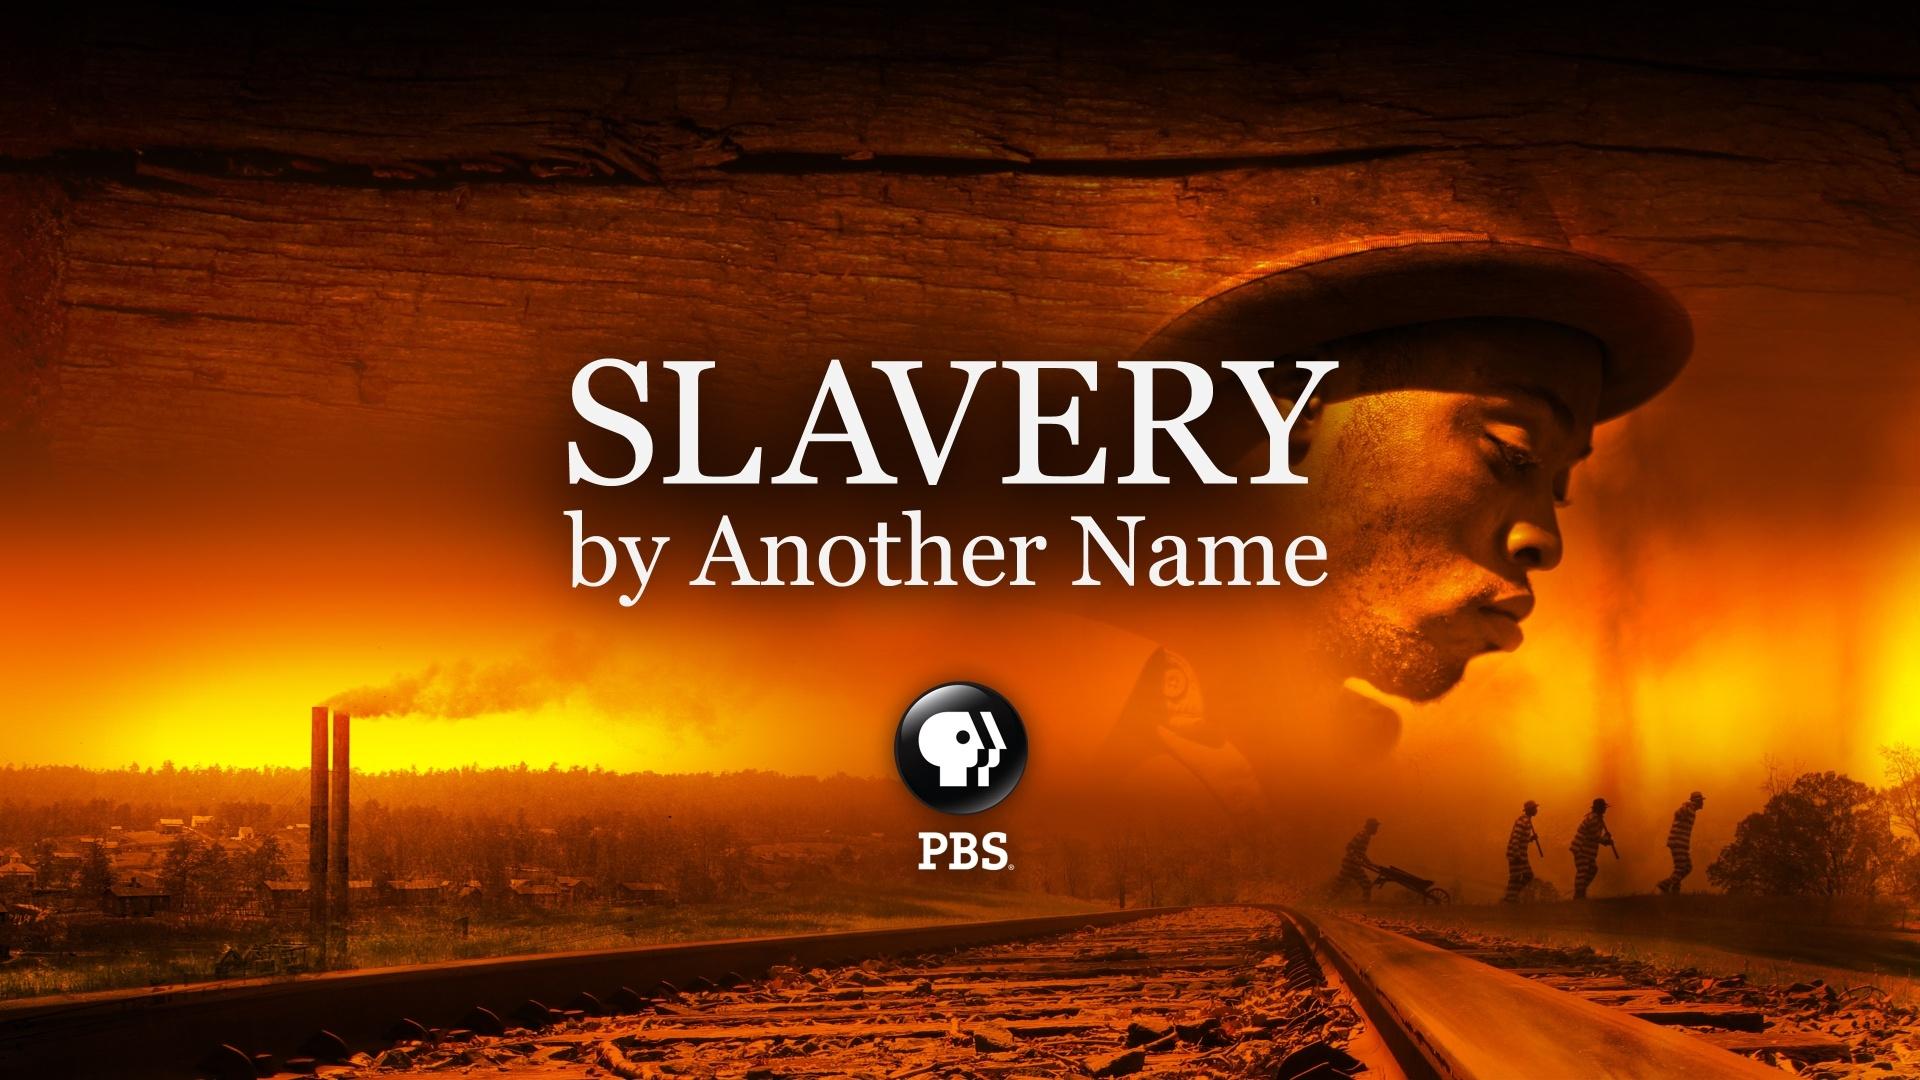 Slavery by Another Name Episode 1 pic